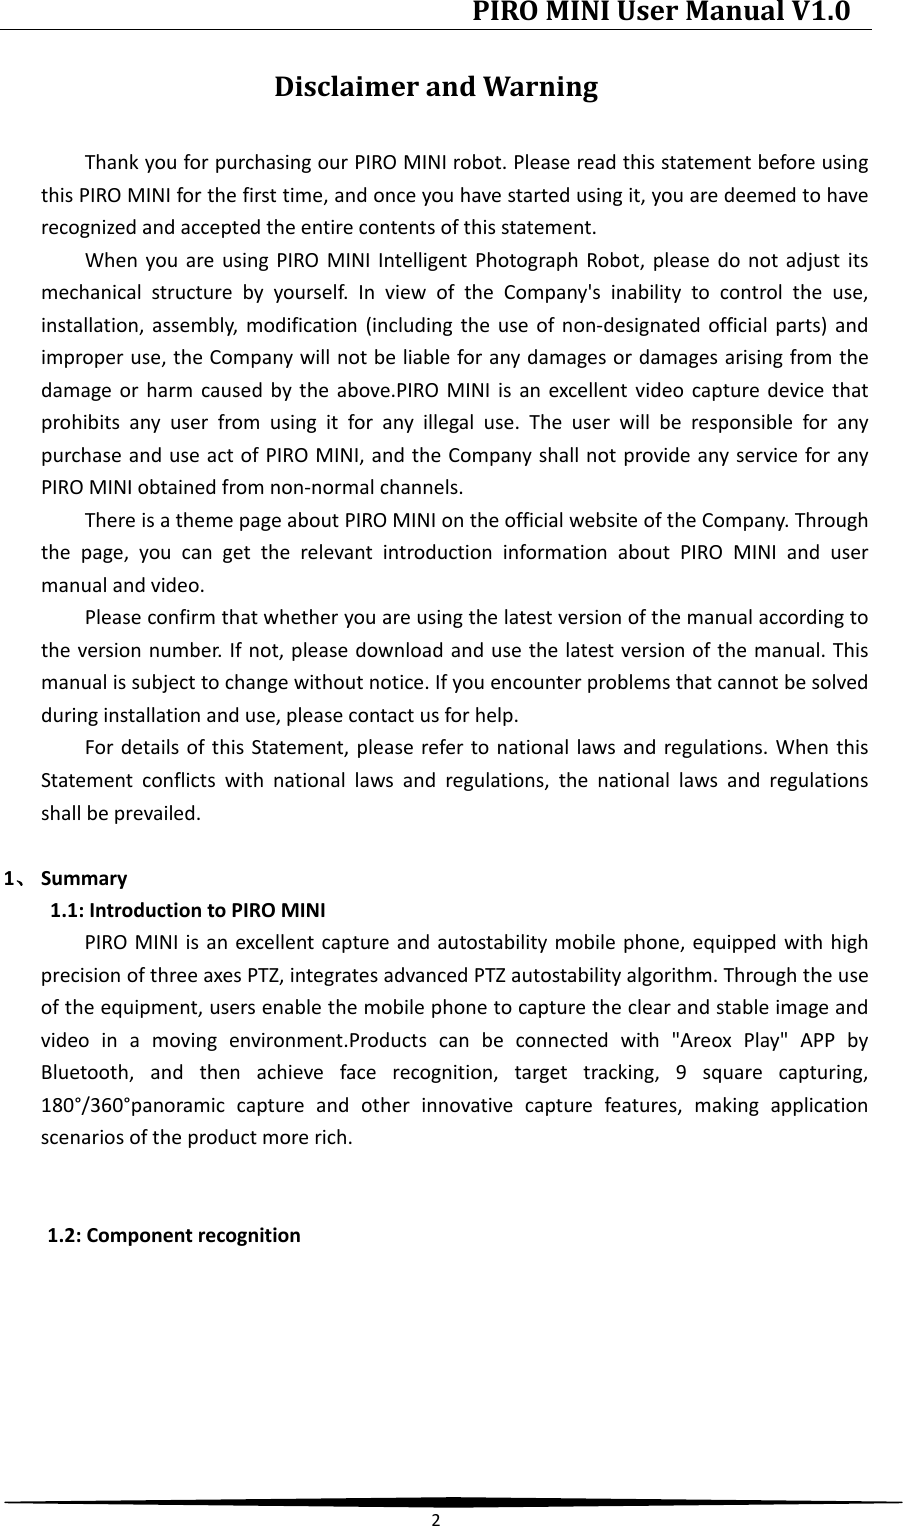 PIRO MINI User Manual V1.0  2  Disclaimer and Warning Thank you for purchasing our PIRO MINI robot. Please read this statement before using this PIRO MINI for the first time, and once you have started using it, you are deemed to have recognized and accepted the entire contents of this statement. When you are using PIRO MINI Intelligent Photograph Robot, please do not adjust its mechanical structure by yourself. In view of the Company&apos;s inability to control the use, installation, assembly, modification (including the use of non-designated official parts) and improper use, the Company will not be liable for any damages or damages arising from the damage or harm caused by the above.PIRO MINI is an excellent video capture device that prohibits any user from using it for any illegal use. The user will be responsible for any purchase and use act of PIRO MINI, and the Company shall not provide any service for any PIRO MINI obtained from non-normal channels. There is a theme page about PIRO MINI on the official website of the Company. Through the page, you can get the relevant introduction information about PIRO MINI and user manual and video.   Please confirm that whether you are using the latest version of the manual according to the version number. If not, please download and use the latest version of the manual. This manual is subject to change without notice. If you encounter problems that cannot be solved during installation and use, please contact us for help. For details of this Statement, please refer to national laws and regulations. When this Statement conflicts with national laws and regulations, the national laws and regulations shall be prevailed.  1、 Summary 1.1: Introduction to PIRO MINI PIRO MINI is an excellent capture and autostability mobile phone, equipped with high precision of three axes PTZ, integrates advanced PTZ autostability algorithm. Through the use of the equipment, users enable the mobile phone to capture the clear and stable image and video in a moving environment.Products can be connected with &quot;Areox Play&quot; APP by Bluetooth, and then achieve face recognition, target tracking, 9  square capturing, 180°/360°panoramic capture and other innovative capture features, making application scenarios of the product more rich.   1.2: Component recognition 